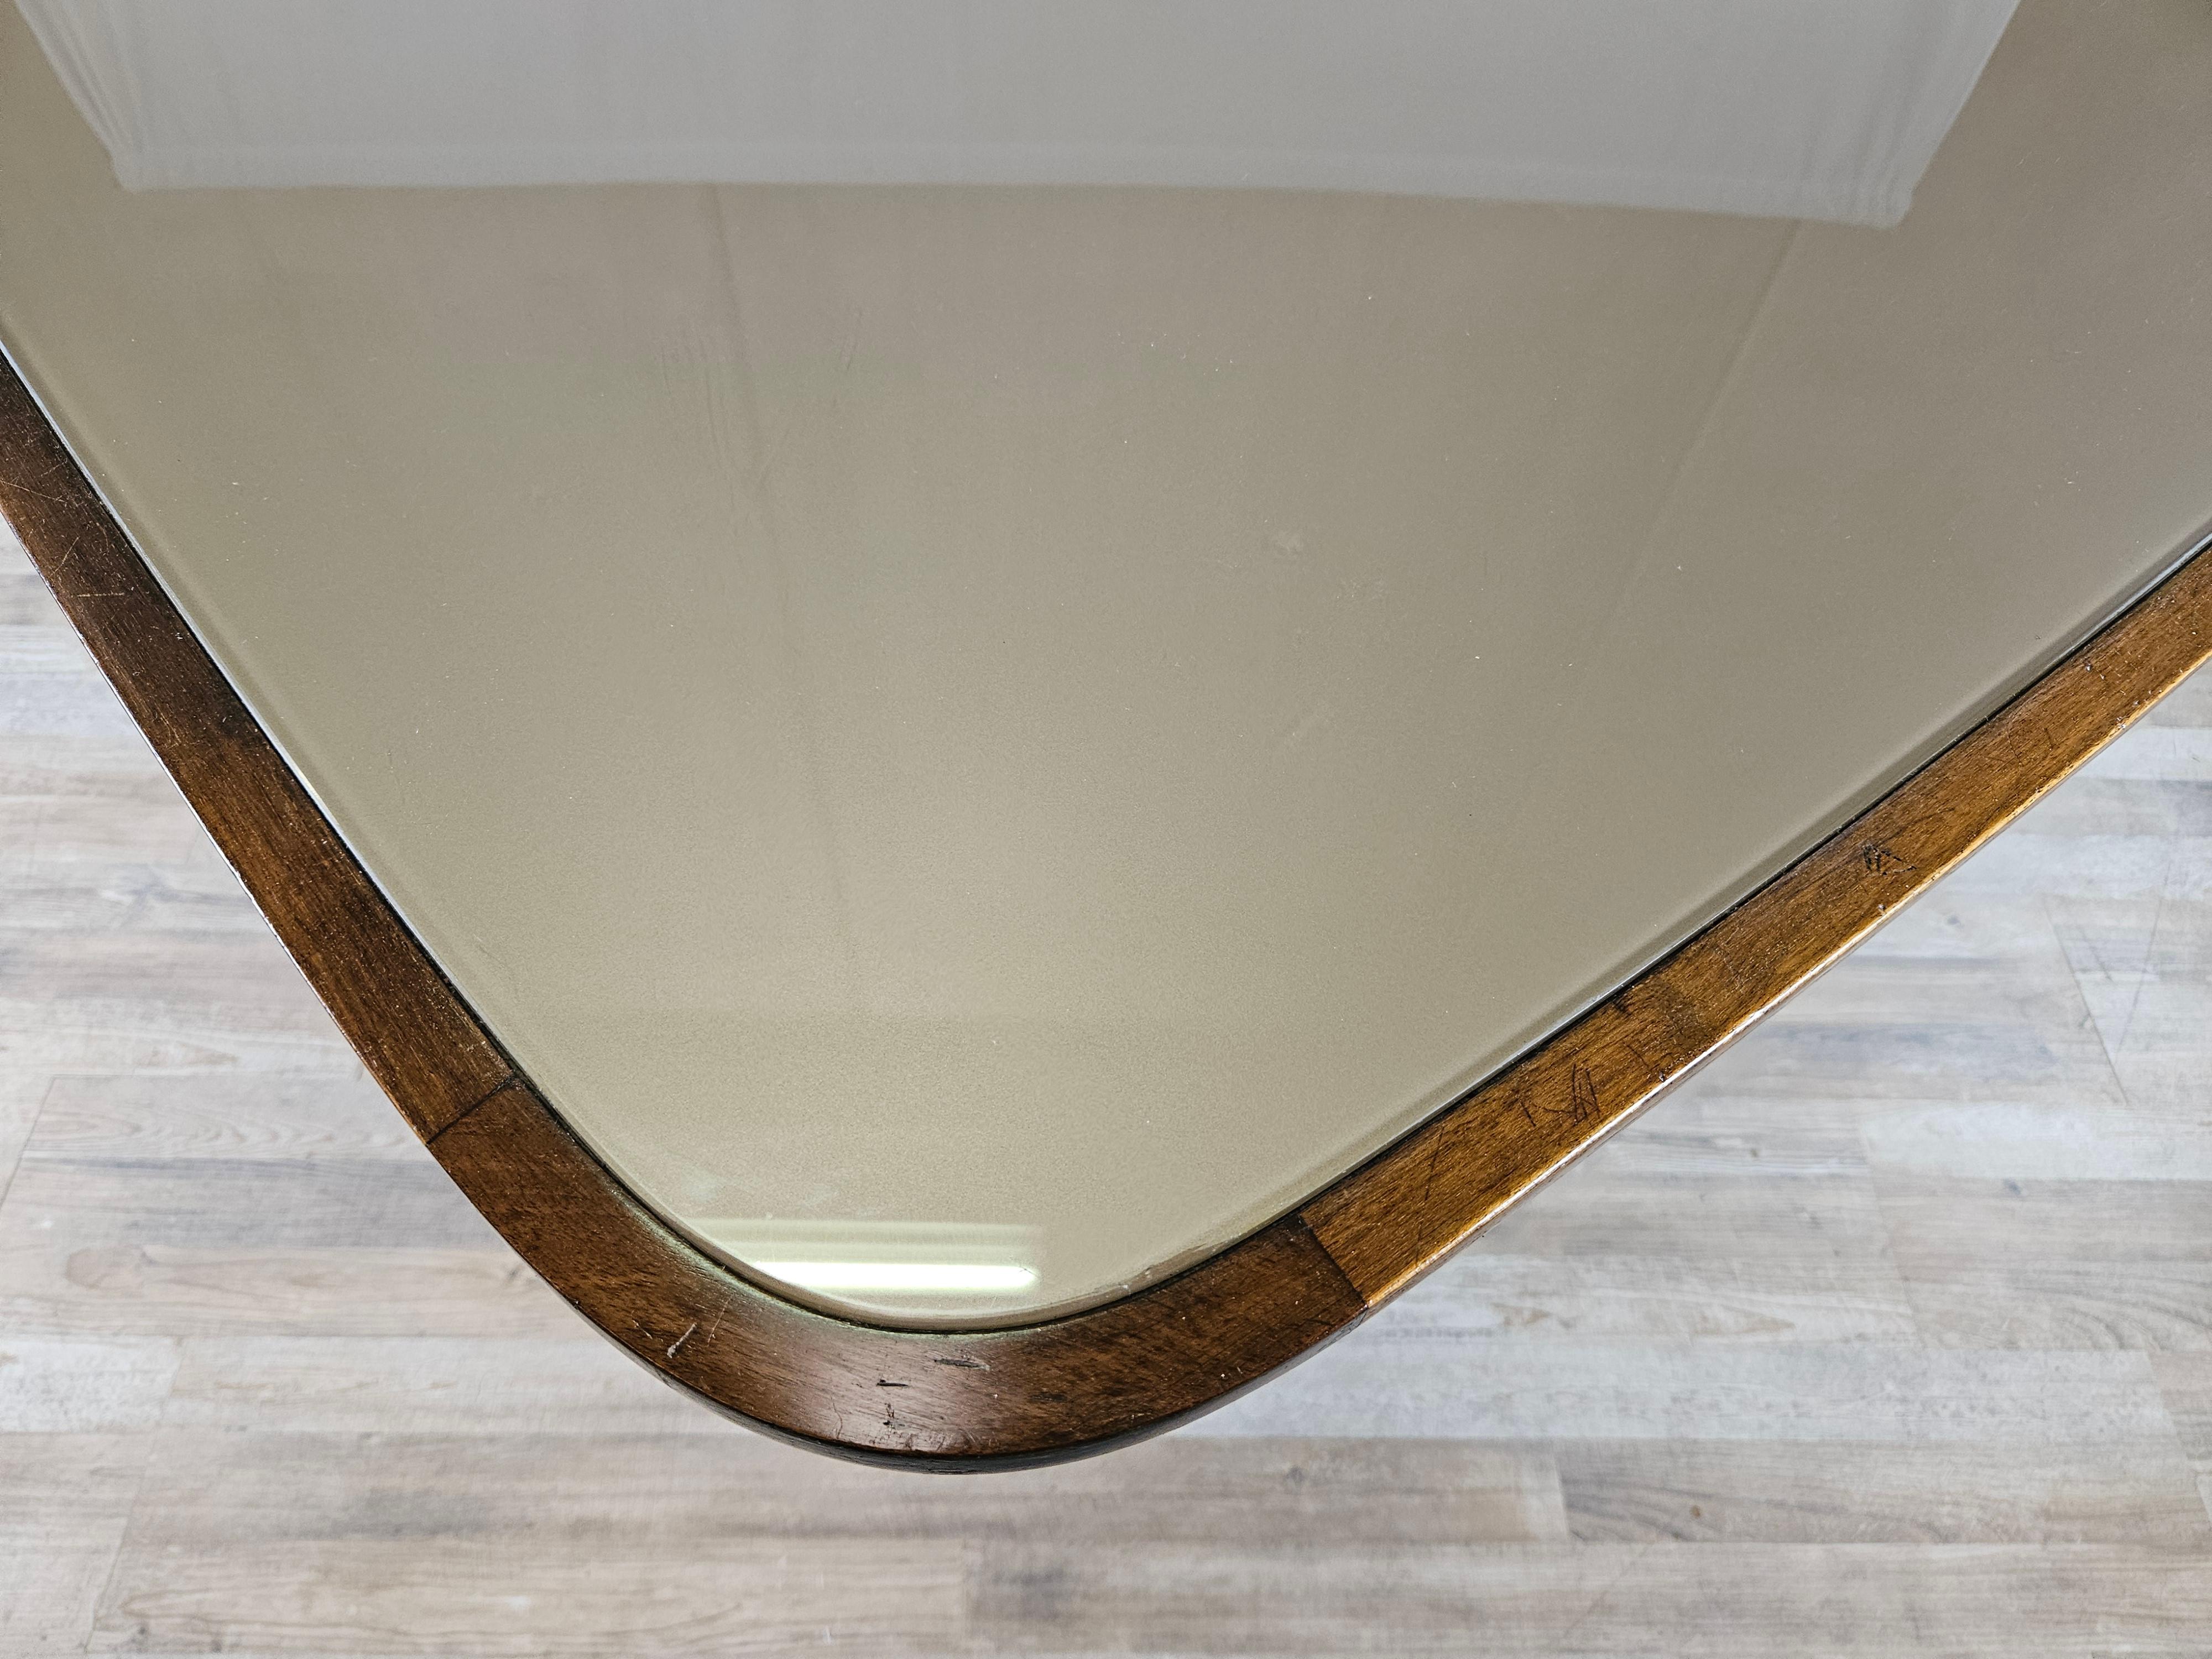 Elegant and refined Italian dining table produced at the turn of the 1940s and 1950s, with a design that moves slowly from Deco to Italian modernism with linear forms and well-defined designs.

The brown glass top is original to the period, has